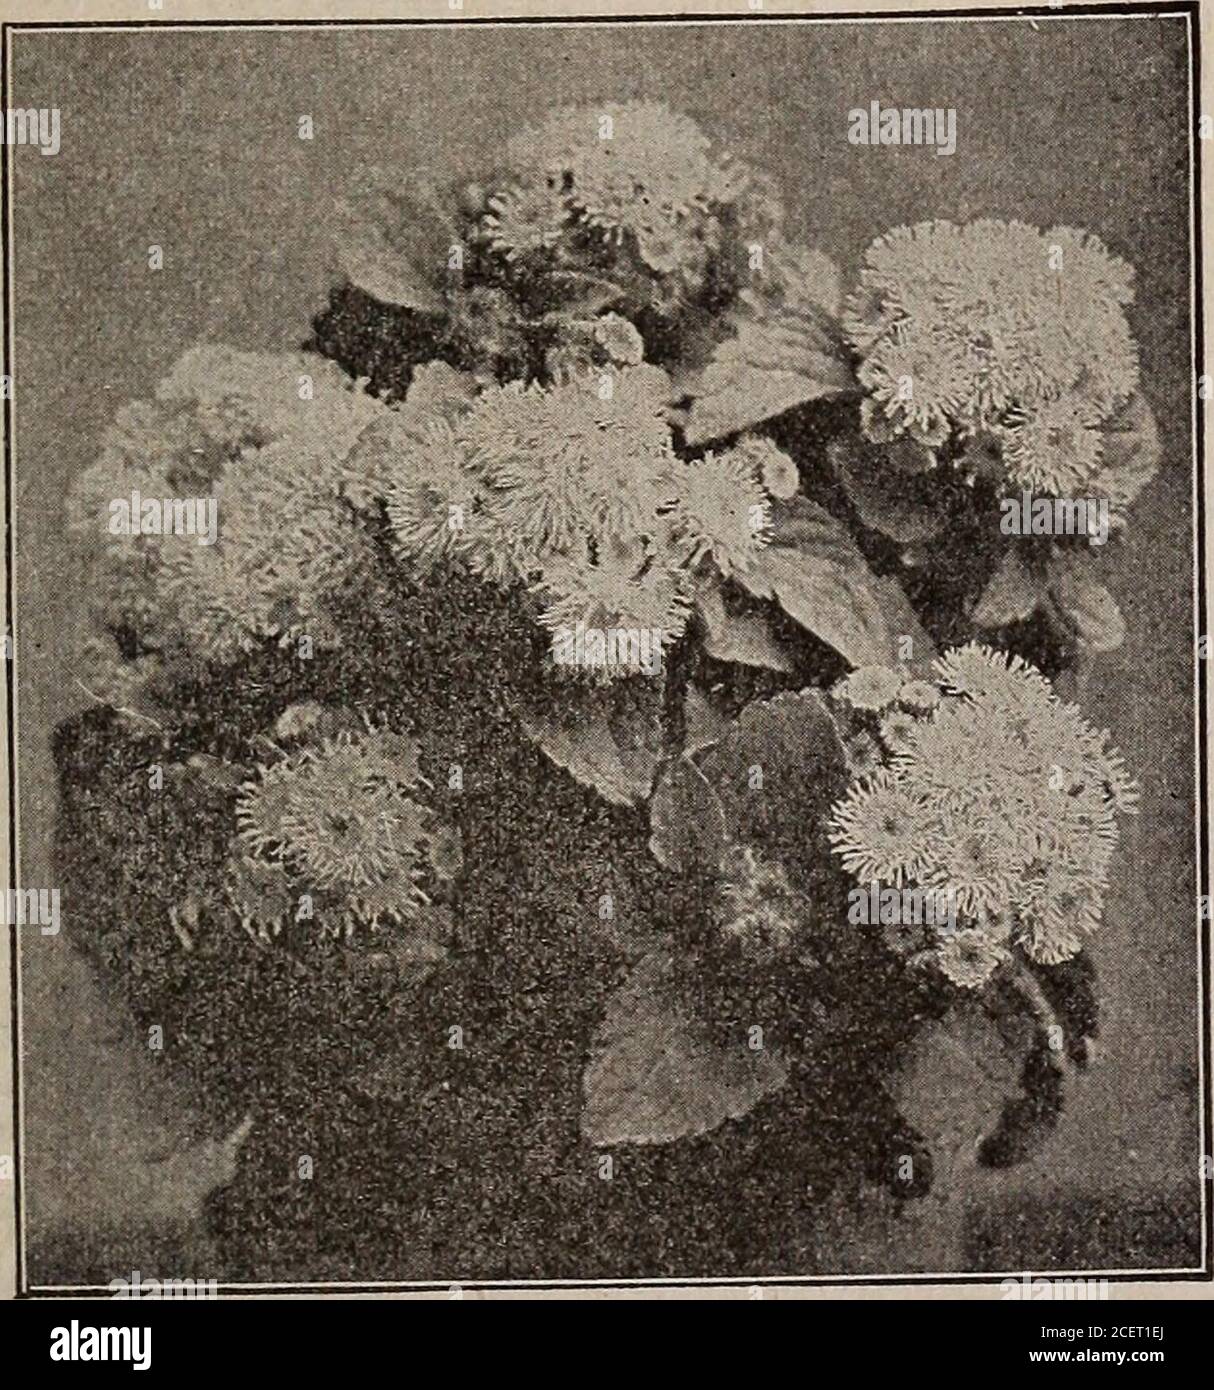 . Seeds, bulbs, shrubs : catalogue 1914. ADONIS AESTIVALIS 2000 ABRONIA umbellata (Sand Verbena). H. A. Pkt. Trailing habit. Thrives in poor soil. Sow in openground in May. Bears pink flowers in clusters all summer 5 2001 ABUTILON. Shrubby plants suitable for house,greenhouse, or garden. 4 ft. Bell-shaped flowers of various colors. Mixed 10 2012 ACHILLEA The Pearl (Yarrow). H. P. 1^ ft. Double white daisy-like flowers in summer and fall. 102022 ACONITUM Napellus (Monks Hood). H. P. 4 ft. Helmet-shaped blue flowers. Does well in shade. 5. AMARANTHUS CATJ TUS Pkt. ADLUMIA cirrhosa. H. B. climber Stock Photo